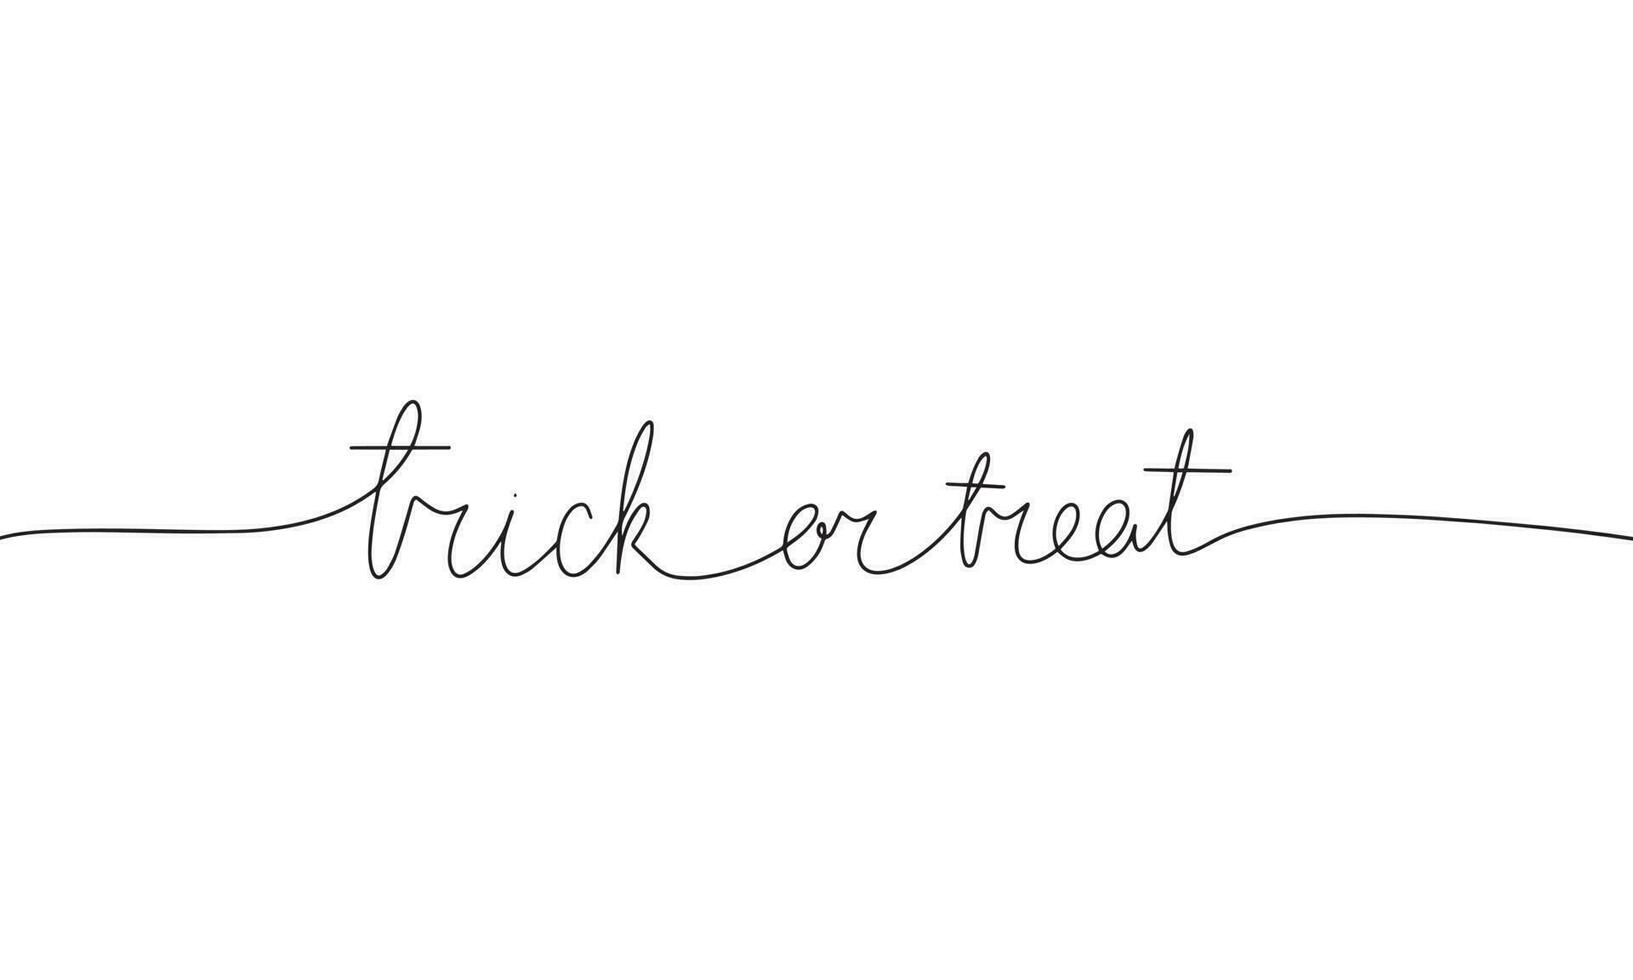 Trick or treat - word with continuous one line. Minimalist drawing of phrase illustration. Trick or treat - continuous one line illustration. vector